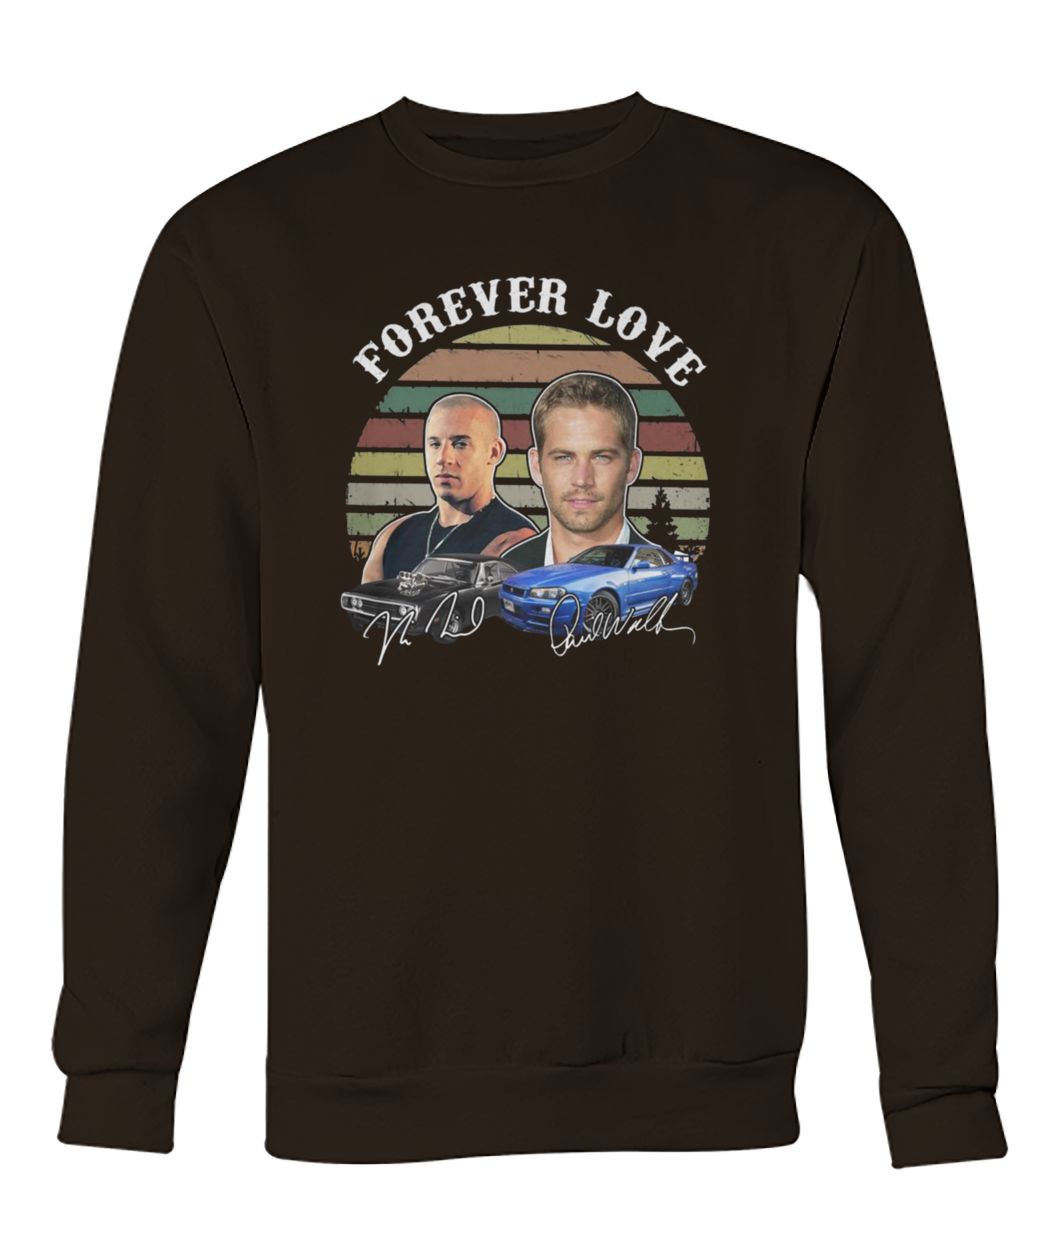 Forever love fast and furious vintage signatures crew neck sweatshirt